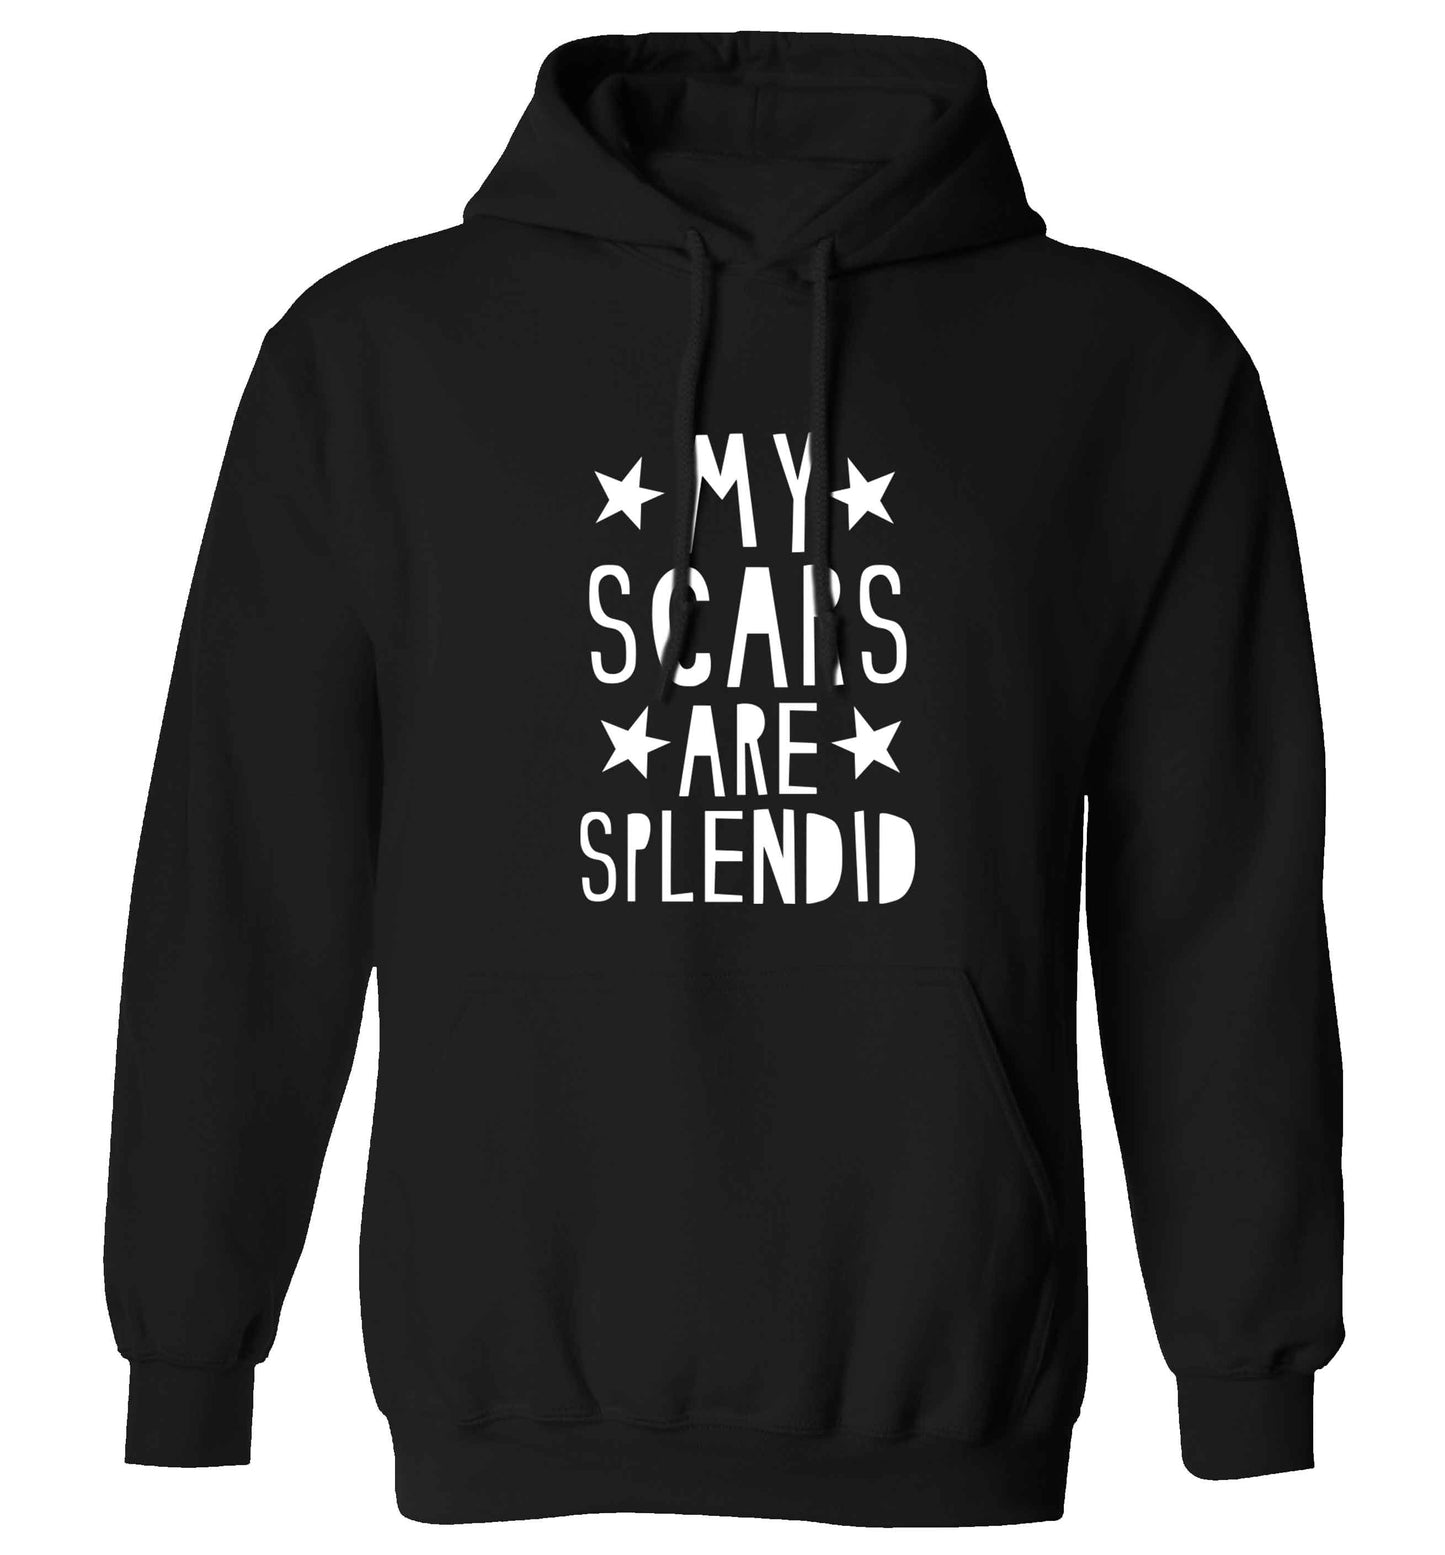 My scars are beautiful adults unisex black hoodie 2XL